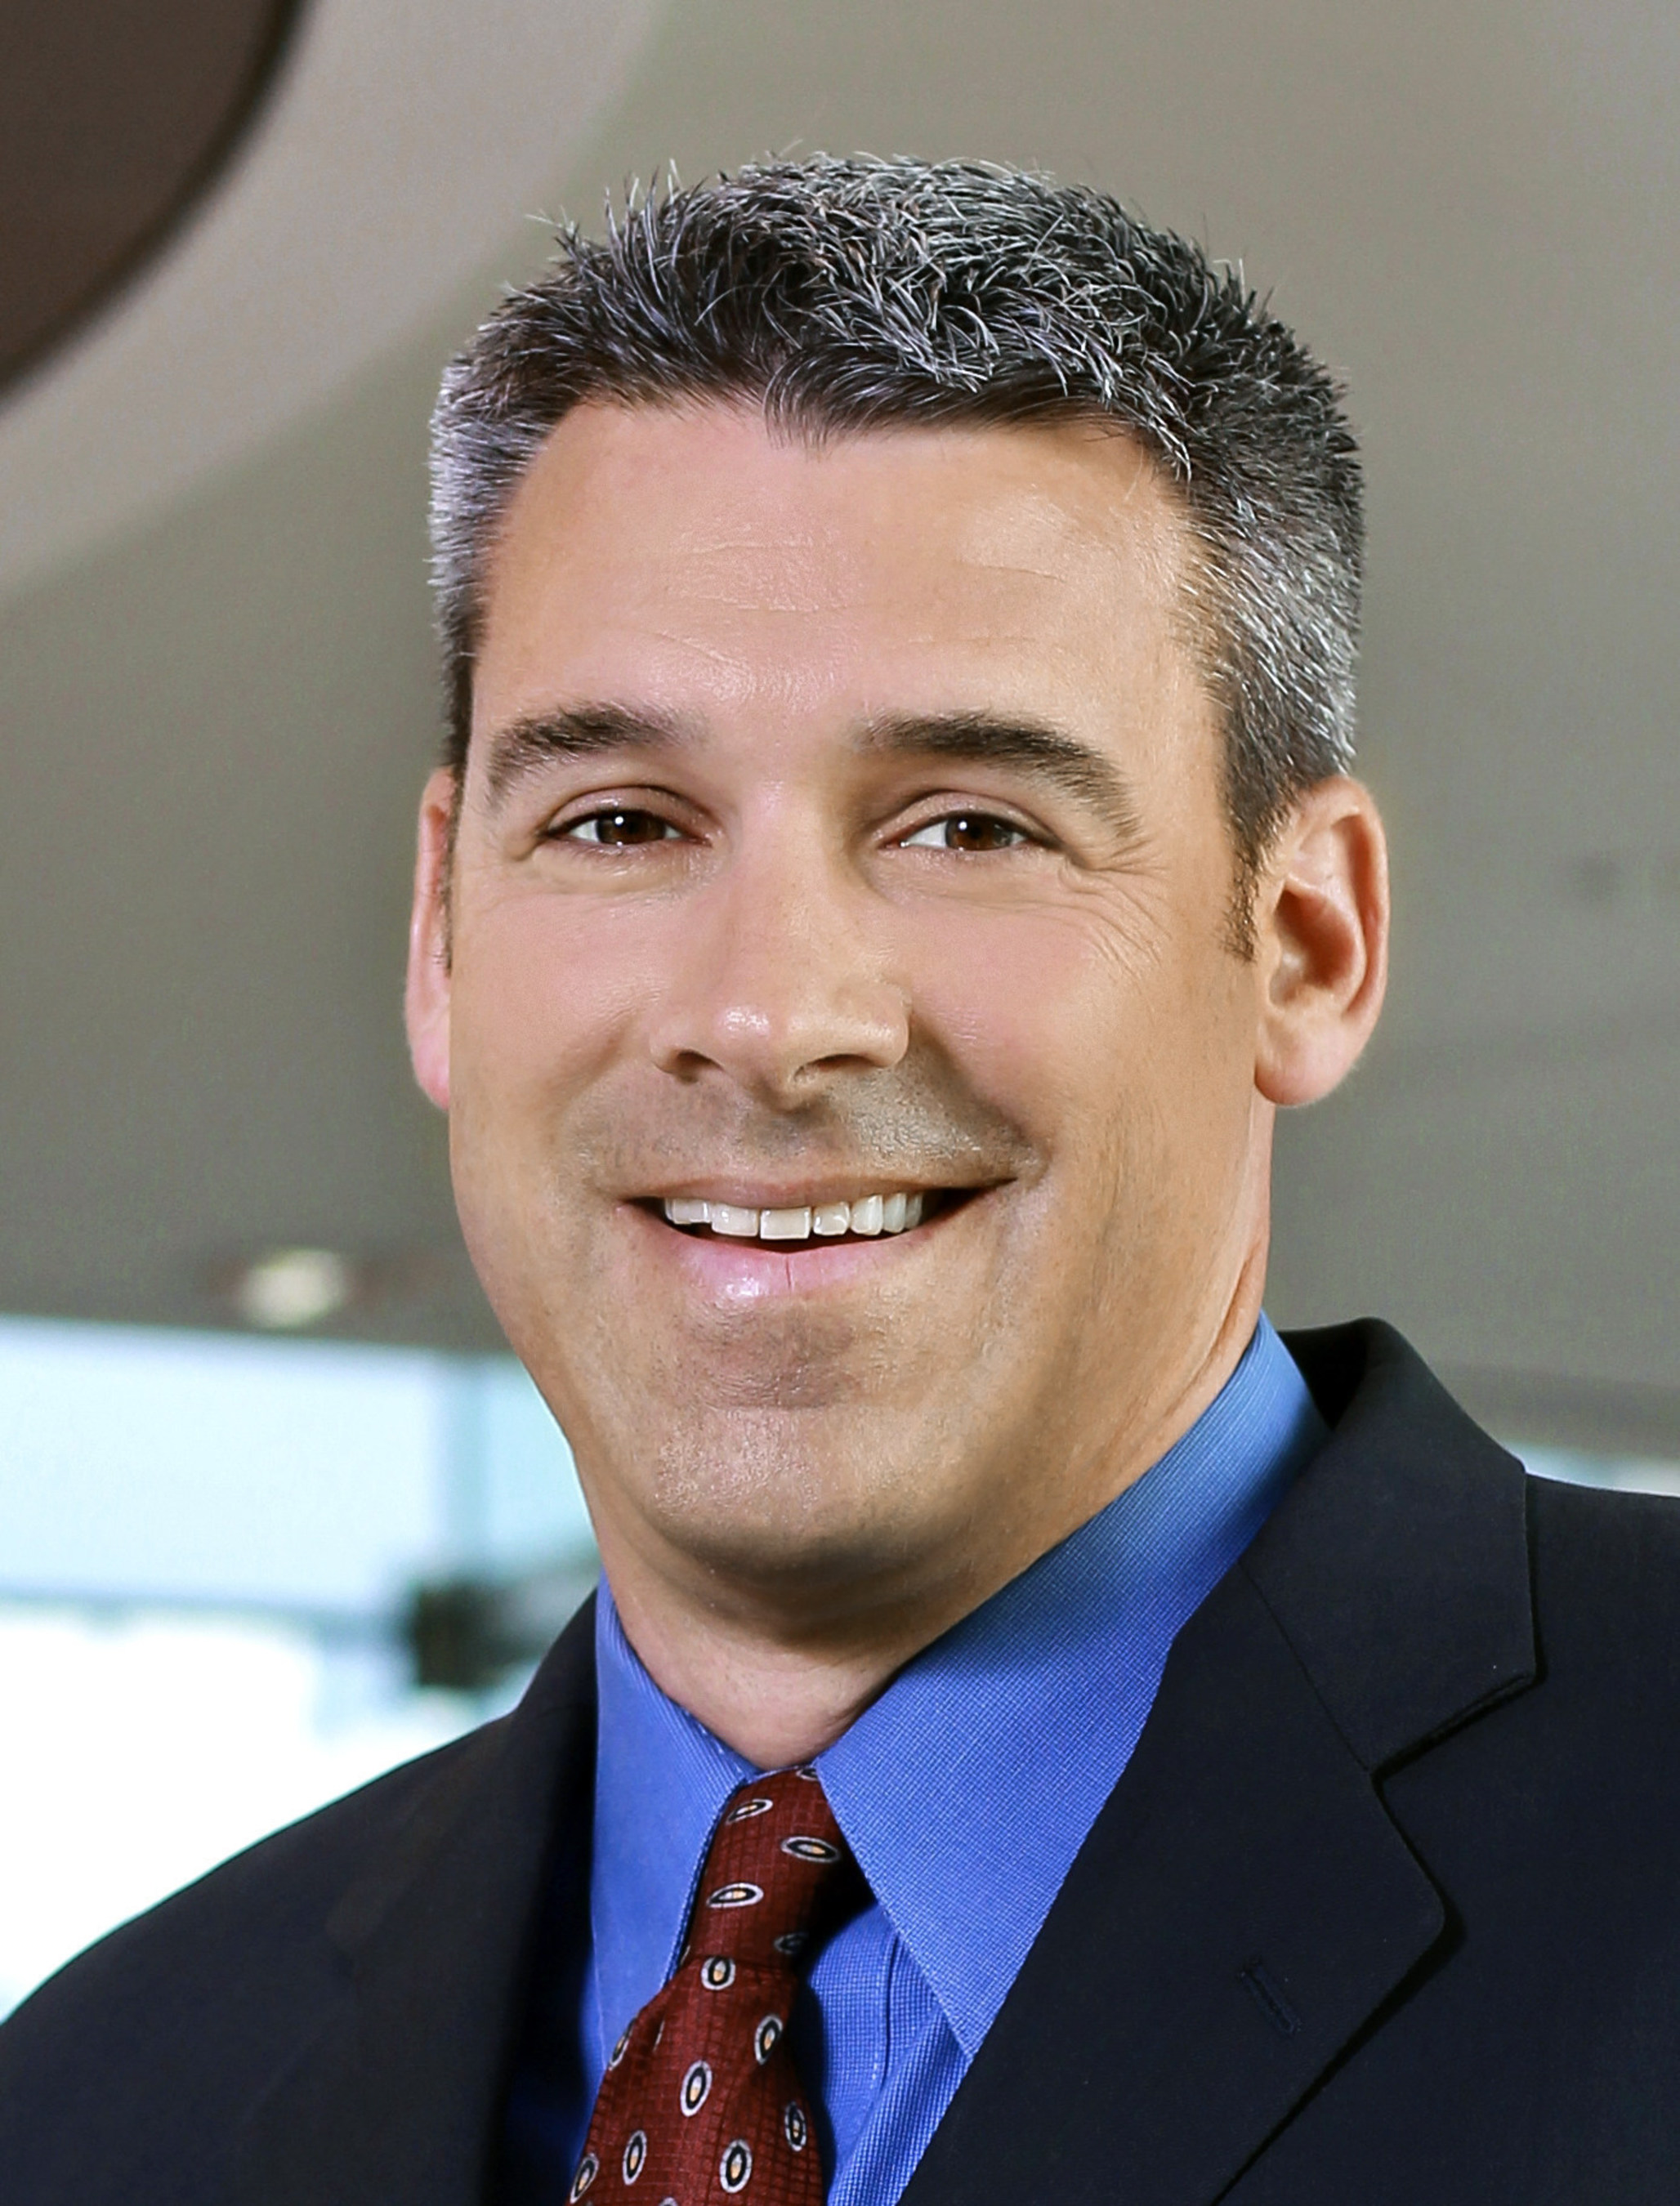 Brian Vieaux, national sales director for Wholesale Lending, Flagstar Bank